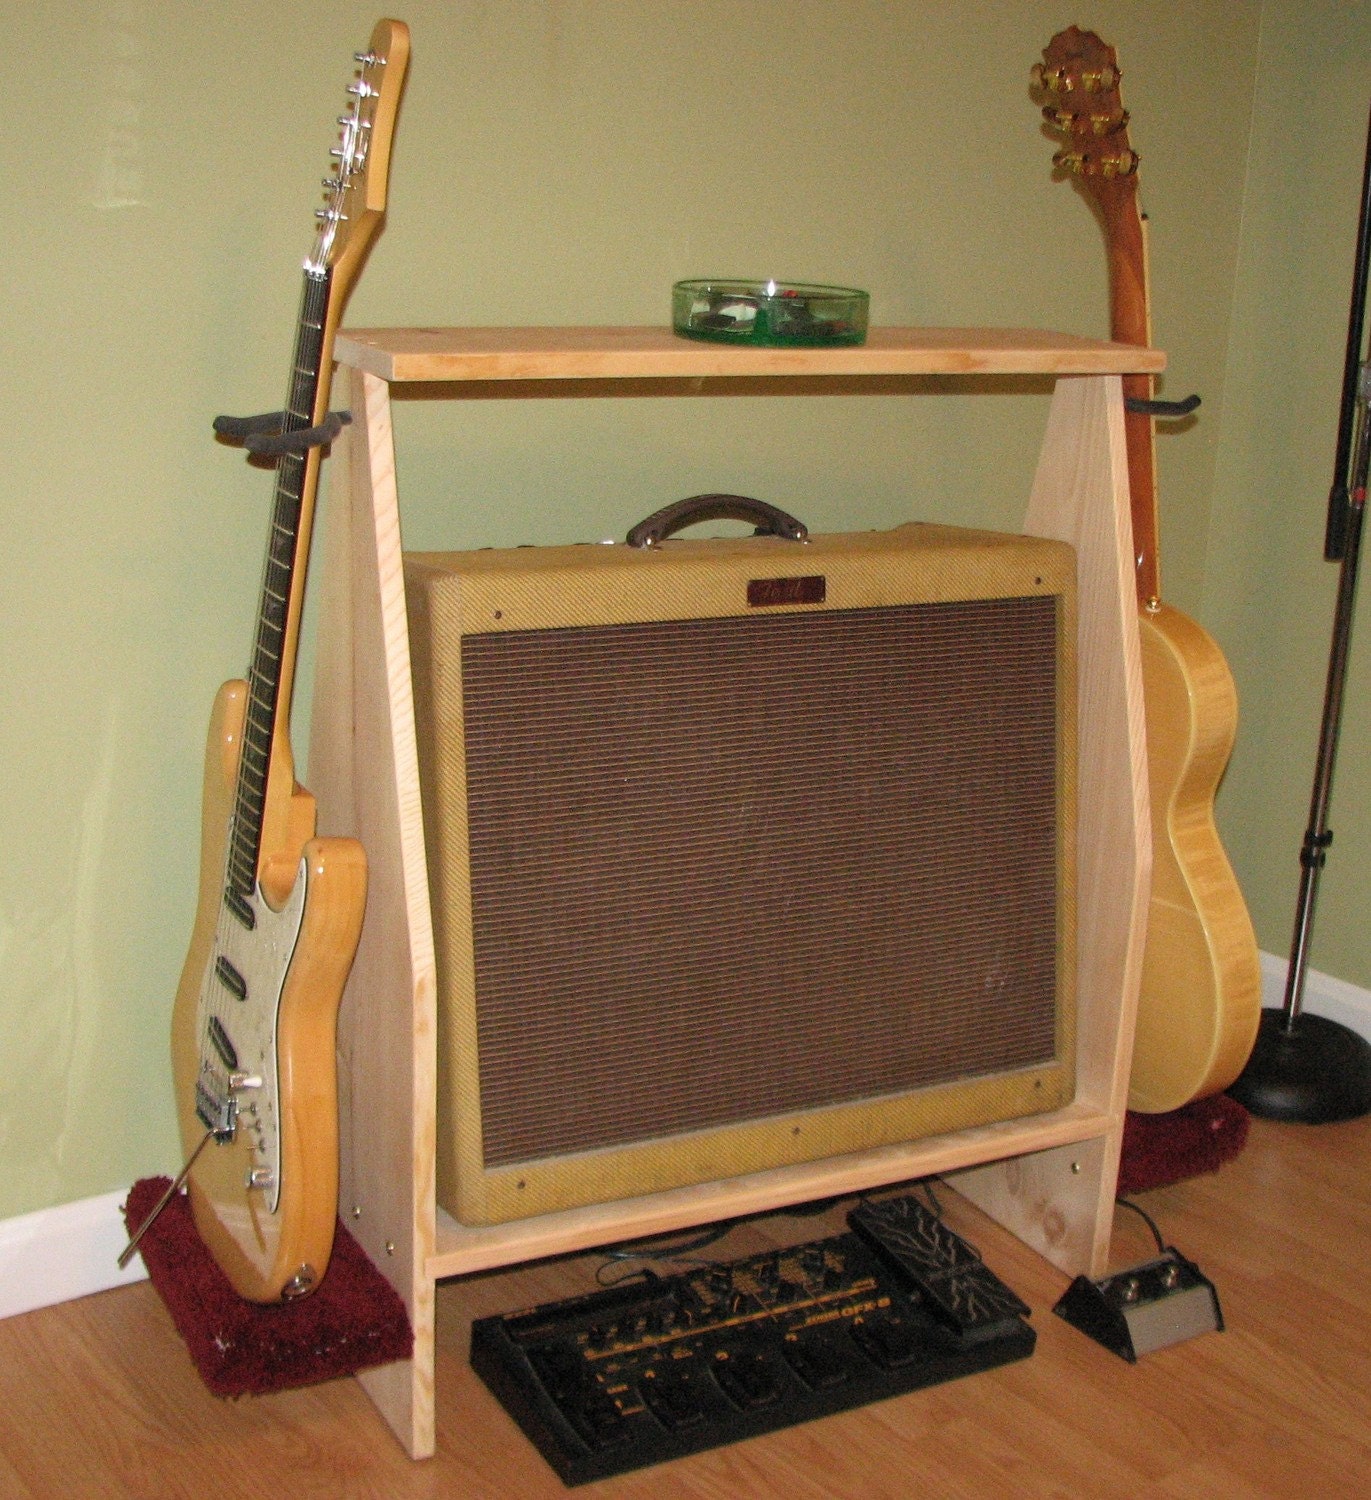 Handcrafted Custom Guitar Amplifier and Guitar Stand by